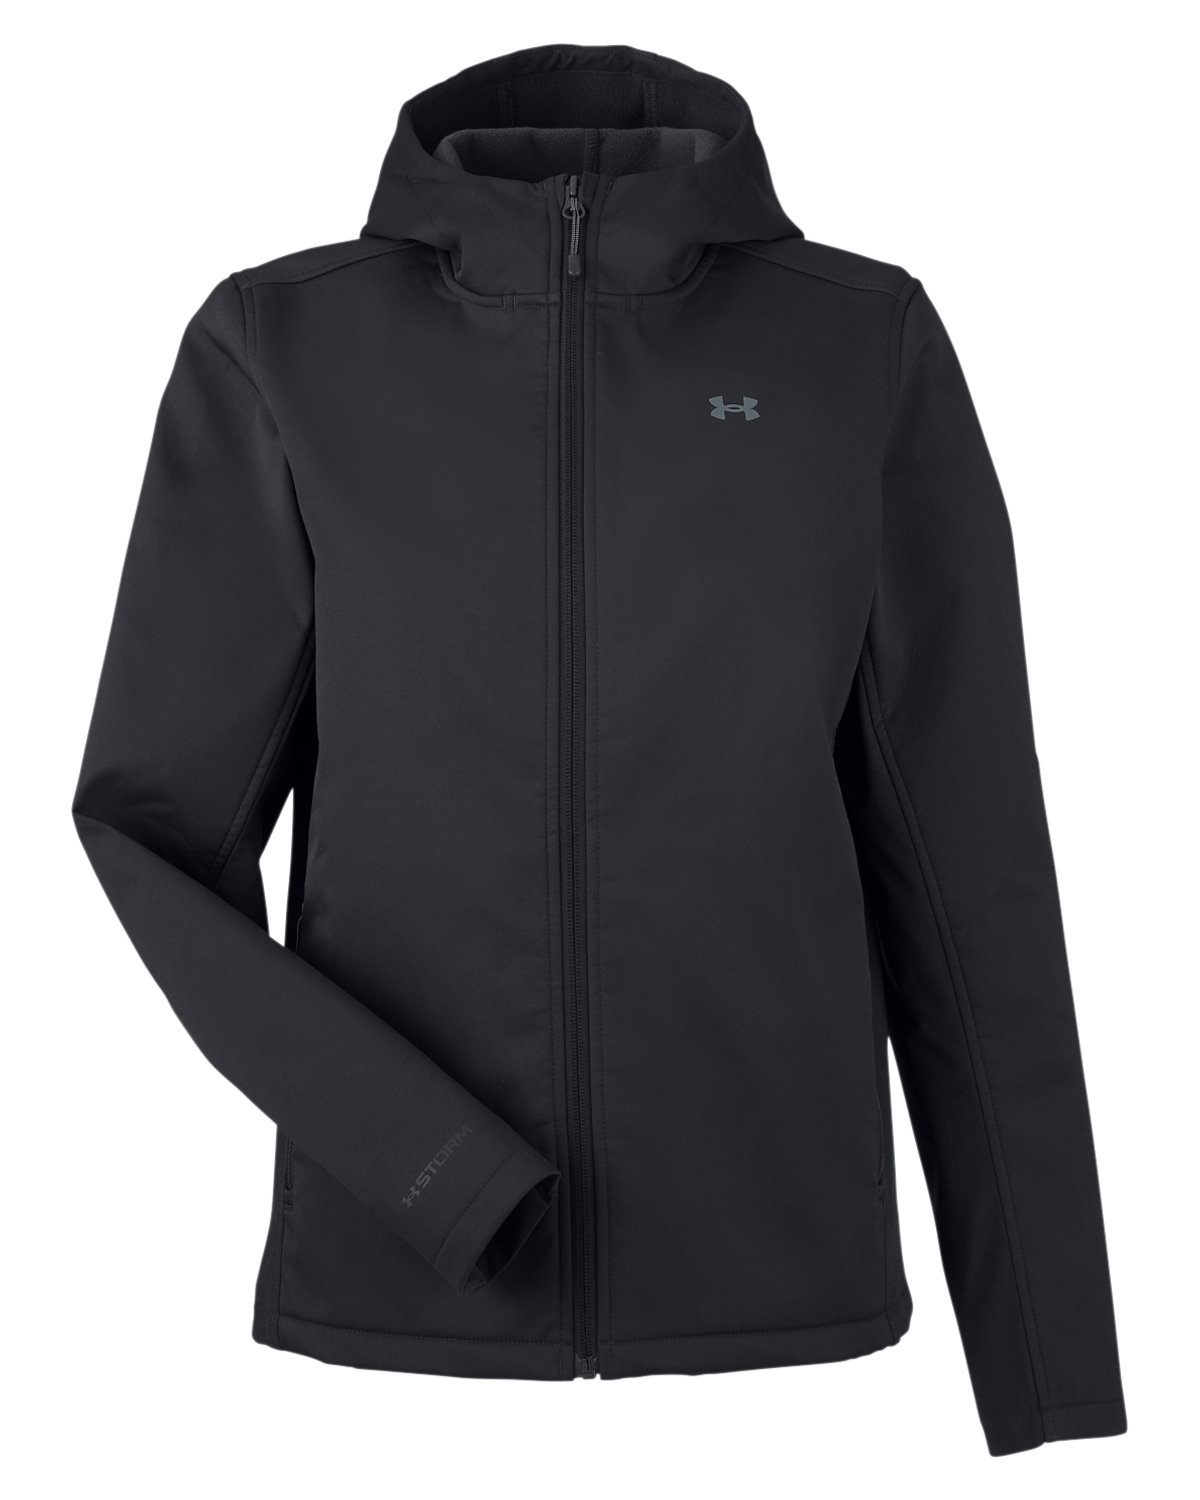 Dublin Under Armour Ladies' ColdGear® Infrared Shield 2.0 Jacket - Knot